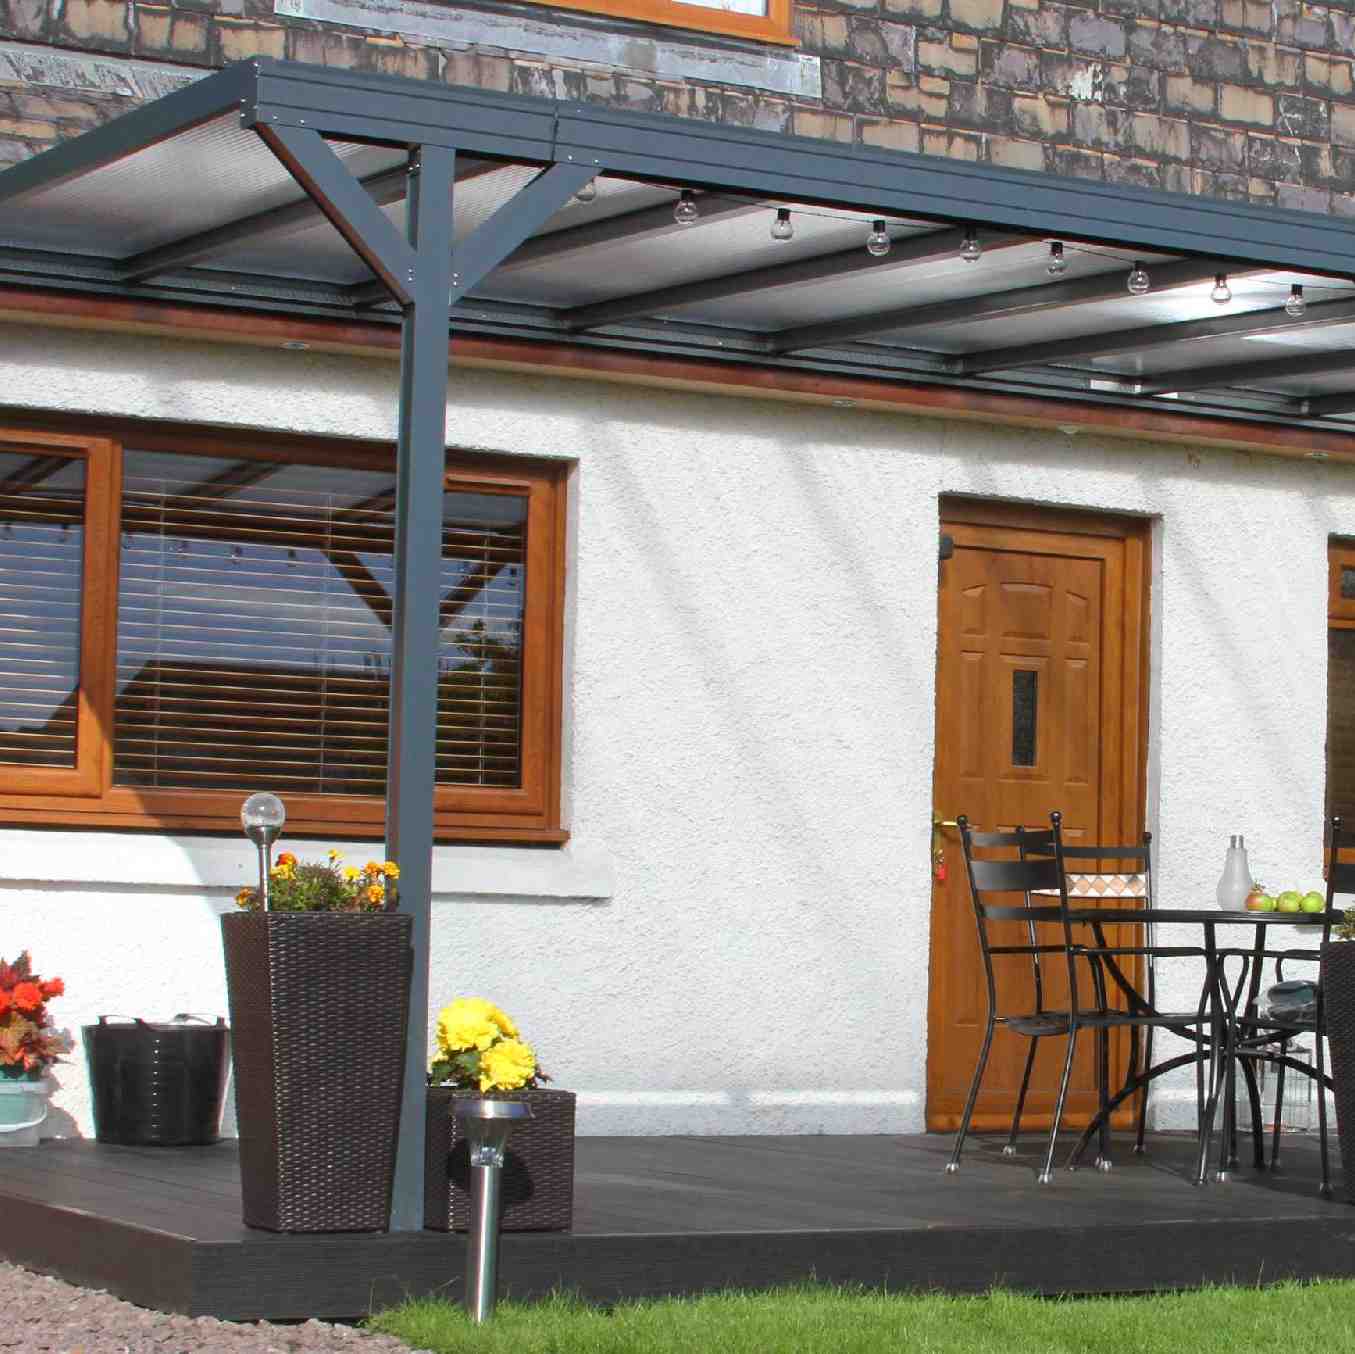 Omega Verandah, Anthracite Grey, 6mm Glass Clear Plate Polycarbonate Glazing - 7.0m (W) x 3.0m (P), (4) Supporting Posts